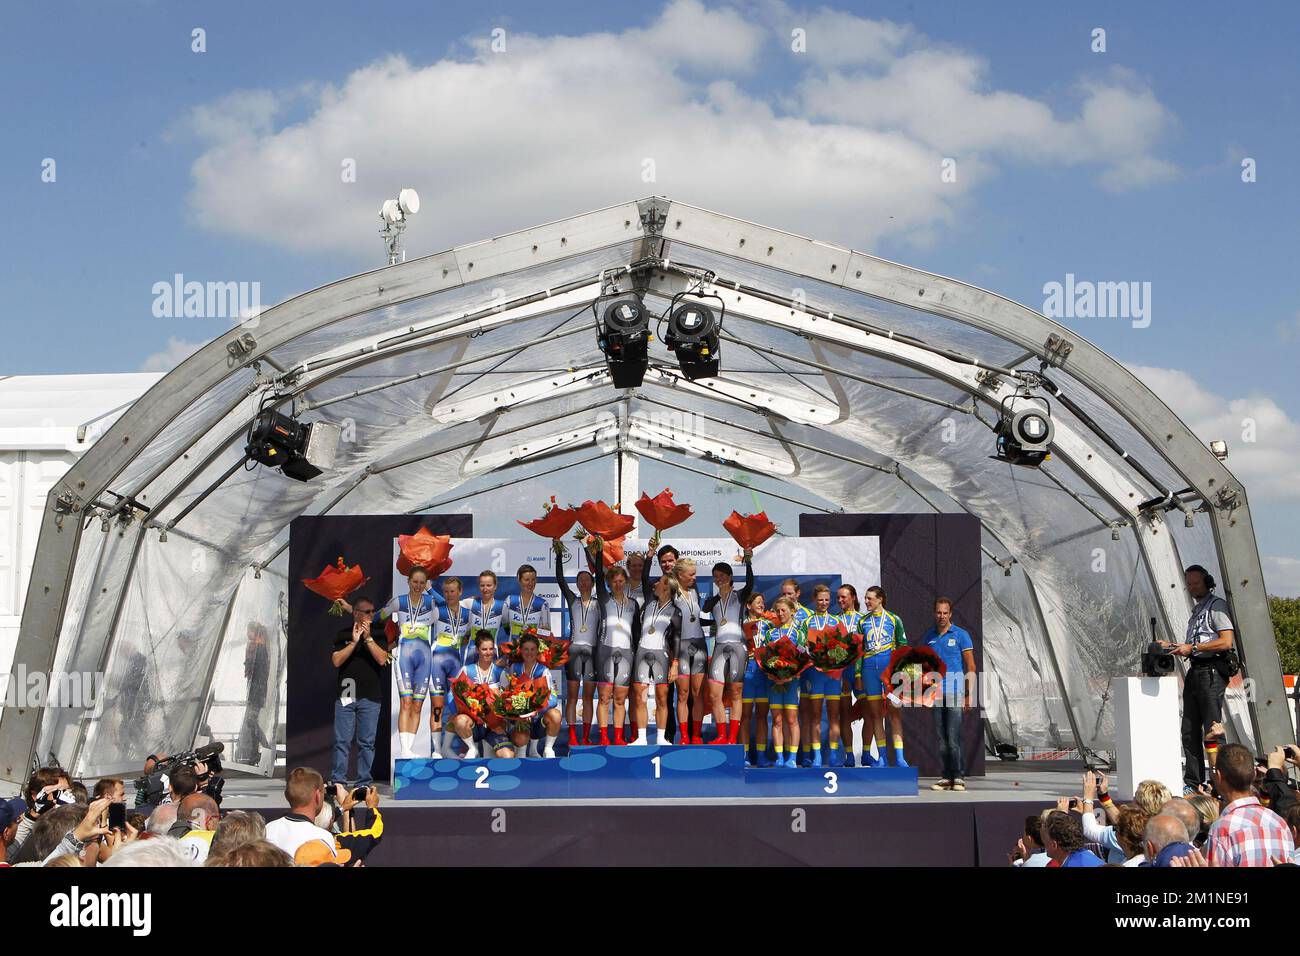 20120916 - VALKENBURG, NETHERLANDS: Team Orica - Ais, team Specialized-Lululemon and Team AA Drinks cyclists celebrate on the podium after the women elite team time trial, 34,2km from Sittard-Geleen to Valkenburg at the UCI Road World Cycling Championships, Sunday 16 September 2012 in Valkenburg, the Netherlands. BELGA PHOTO KRISTOF VAN ACCOM Stock Photo